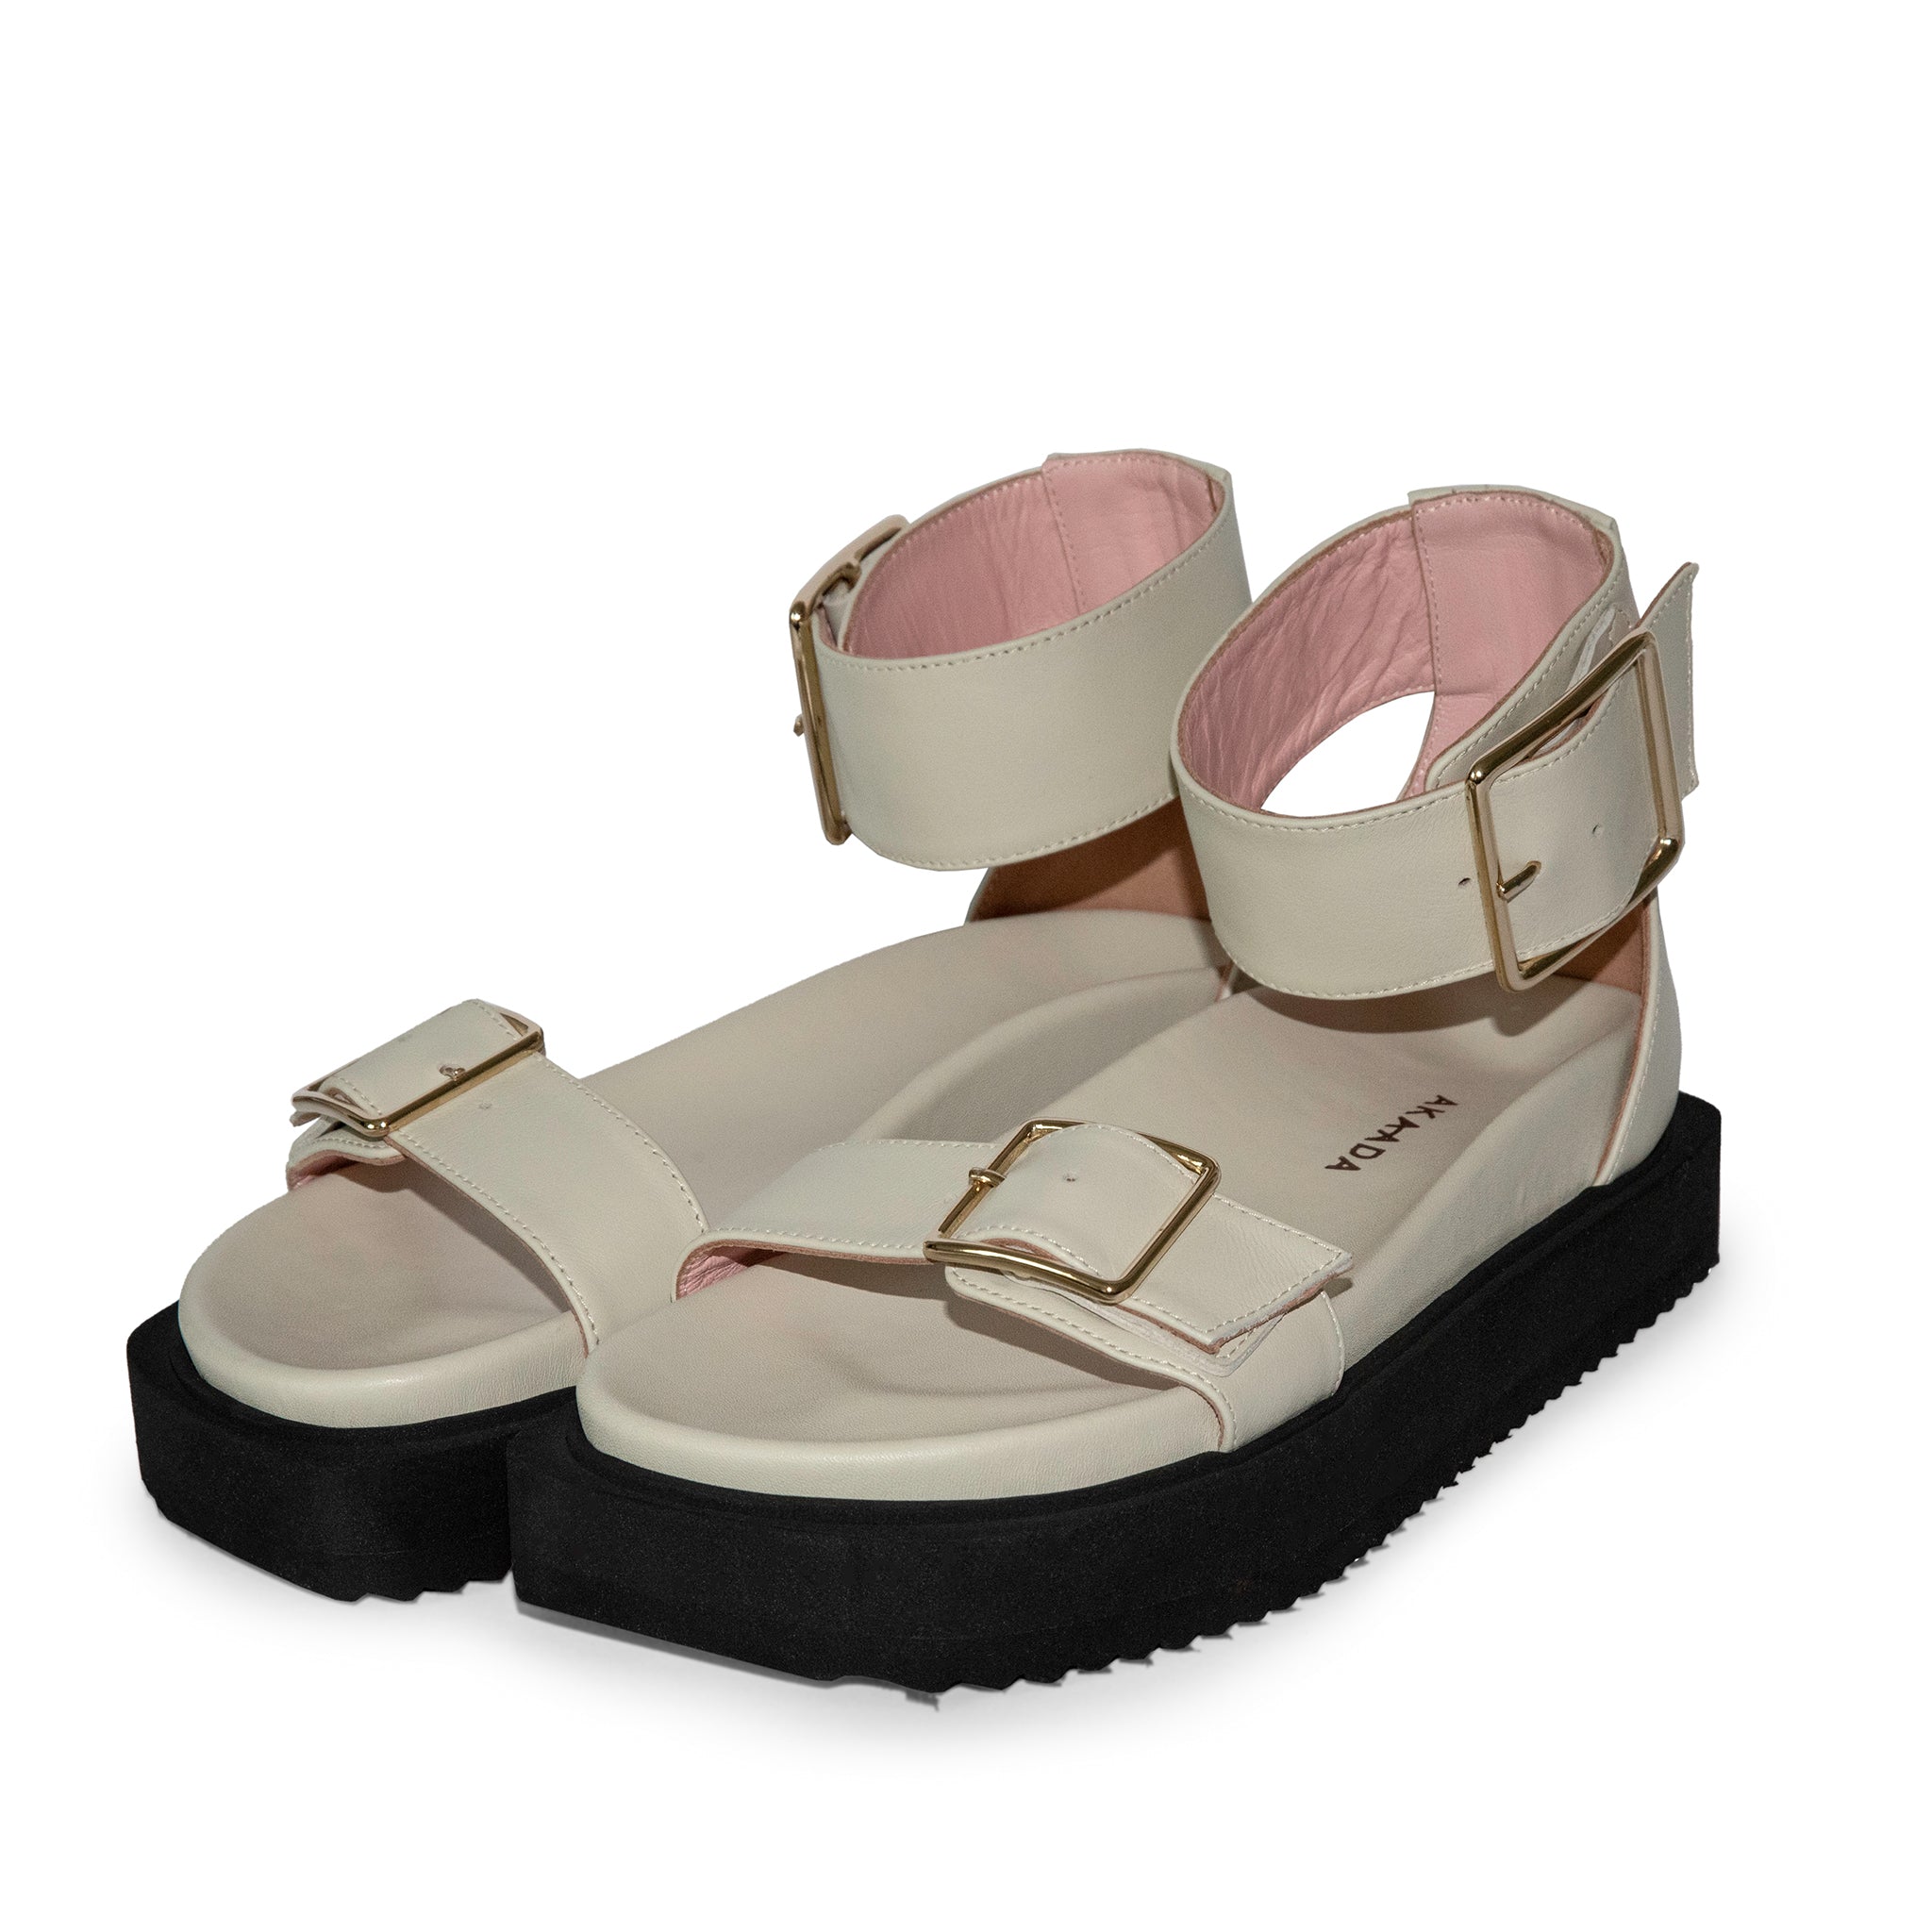 Maru Off White Leather Sandals LES7487-OFFWHITE - 5